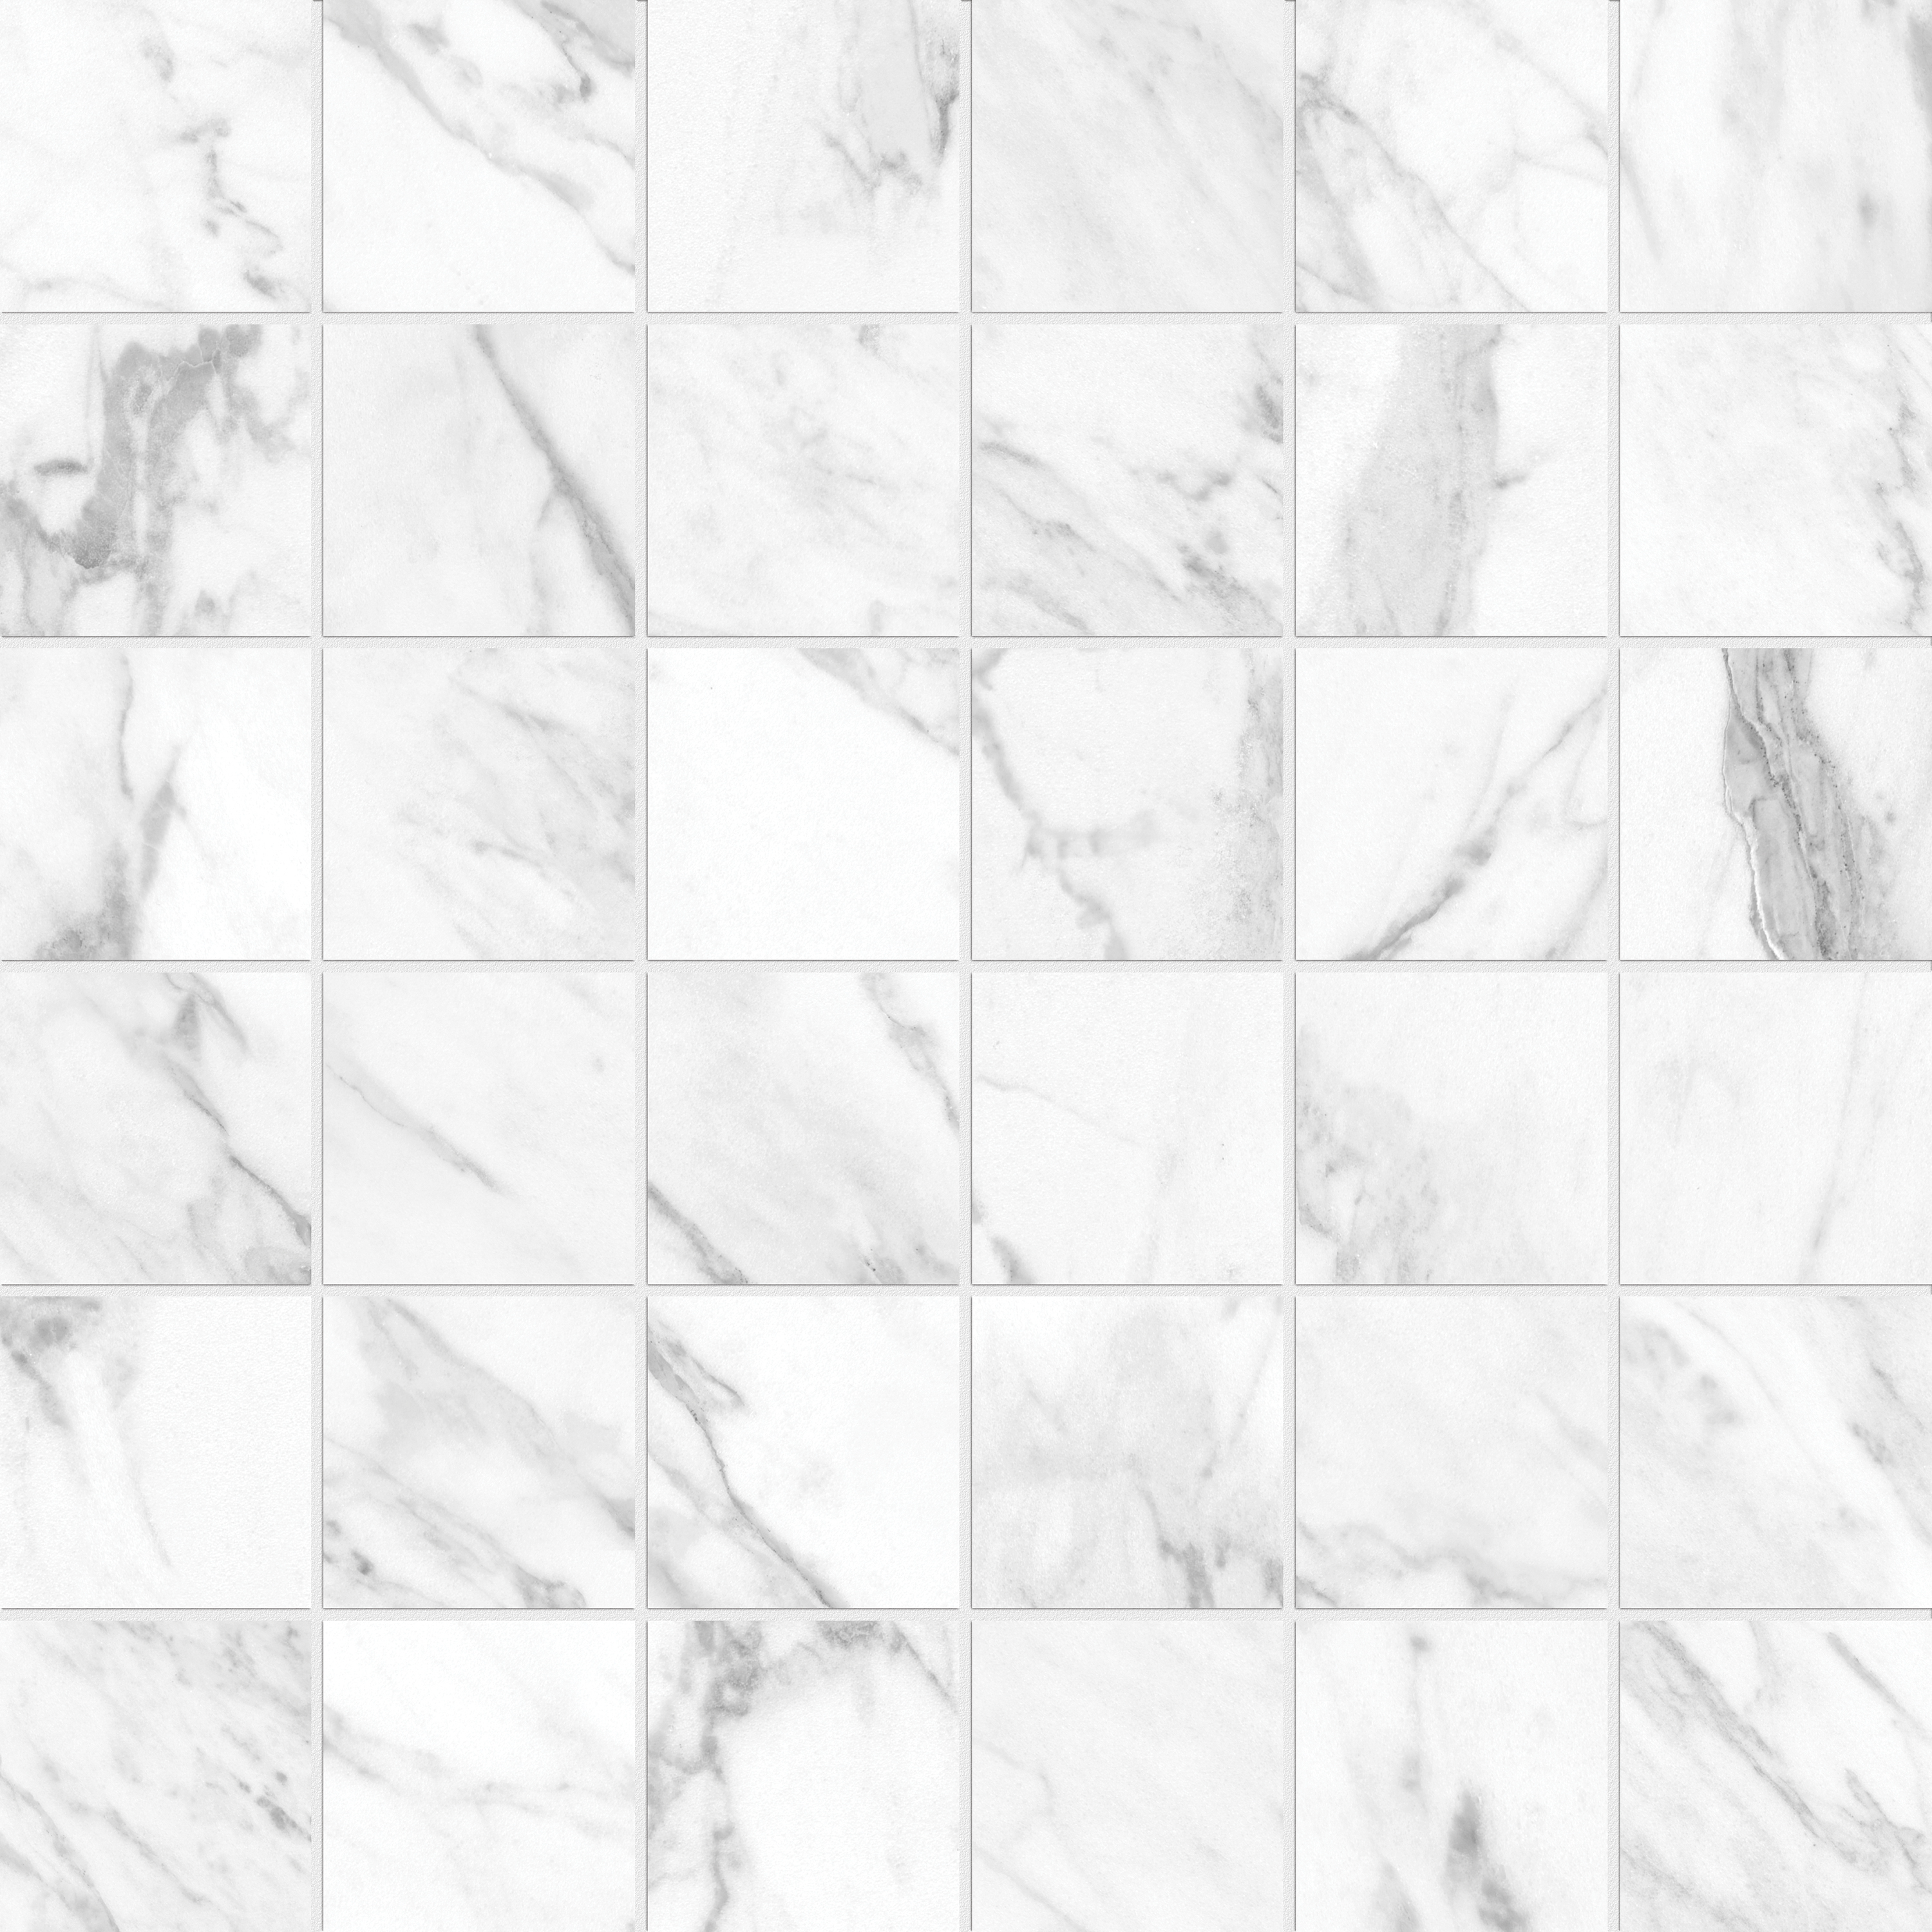 statuarietto straight stack 2x2-inch pattern glazed porcelain mosaic from la marca anatolia collection distributed by surface group international honed finish straight edge edge mesh shape